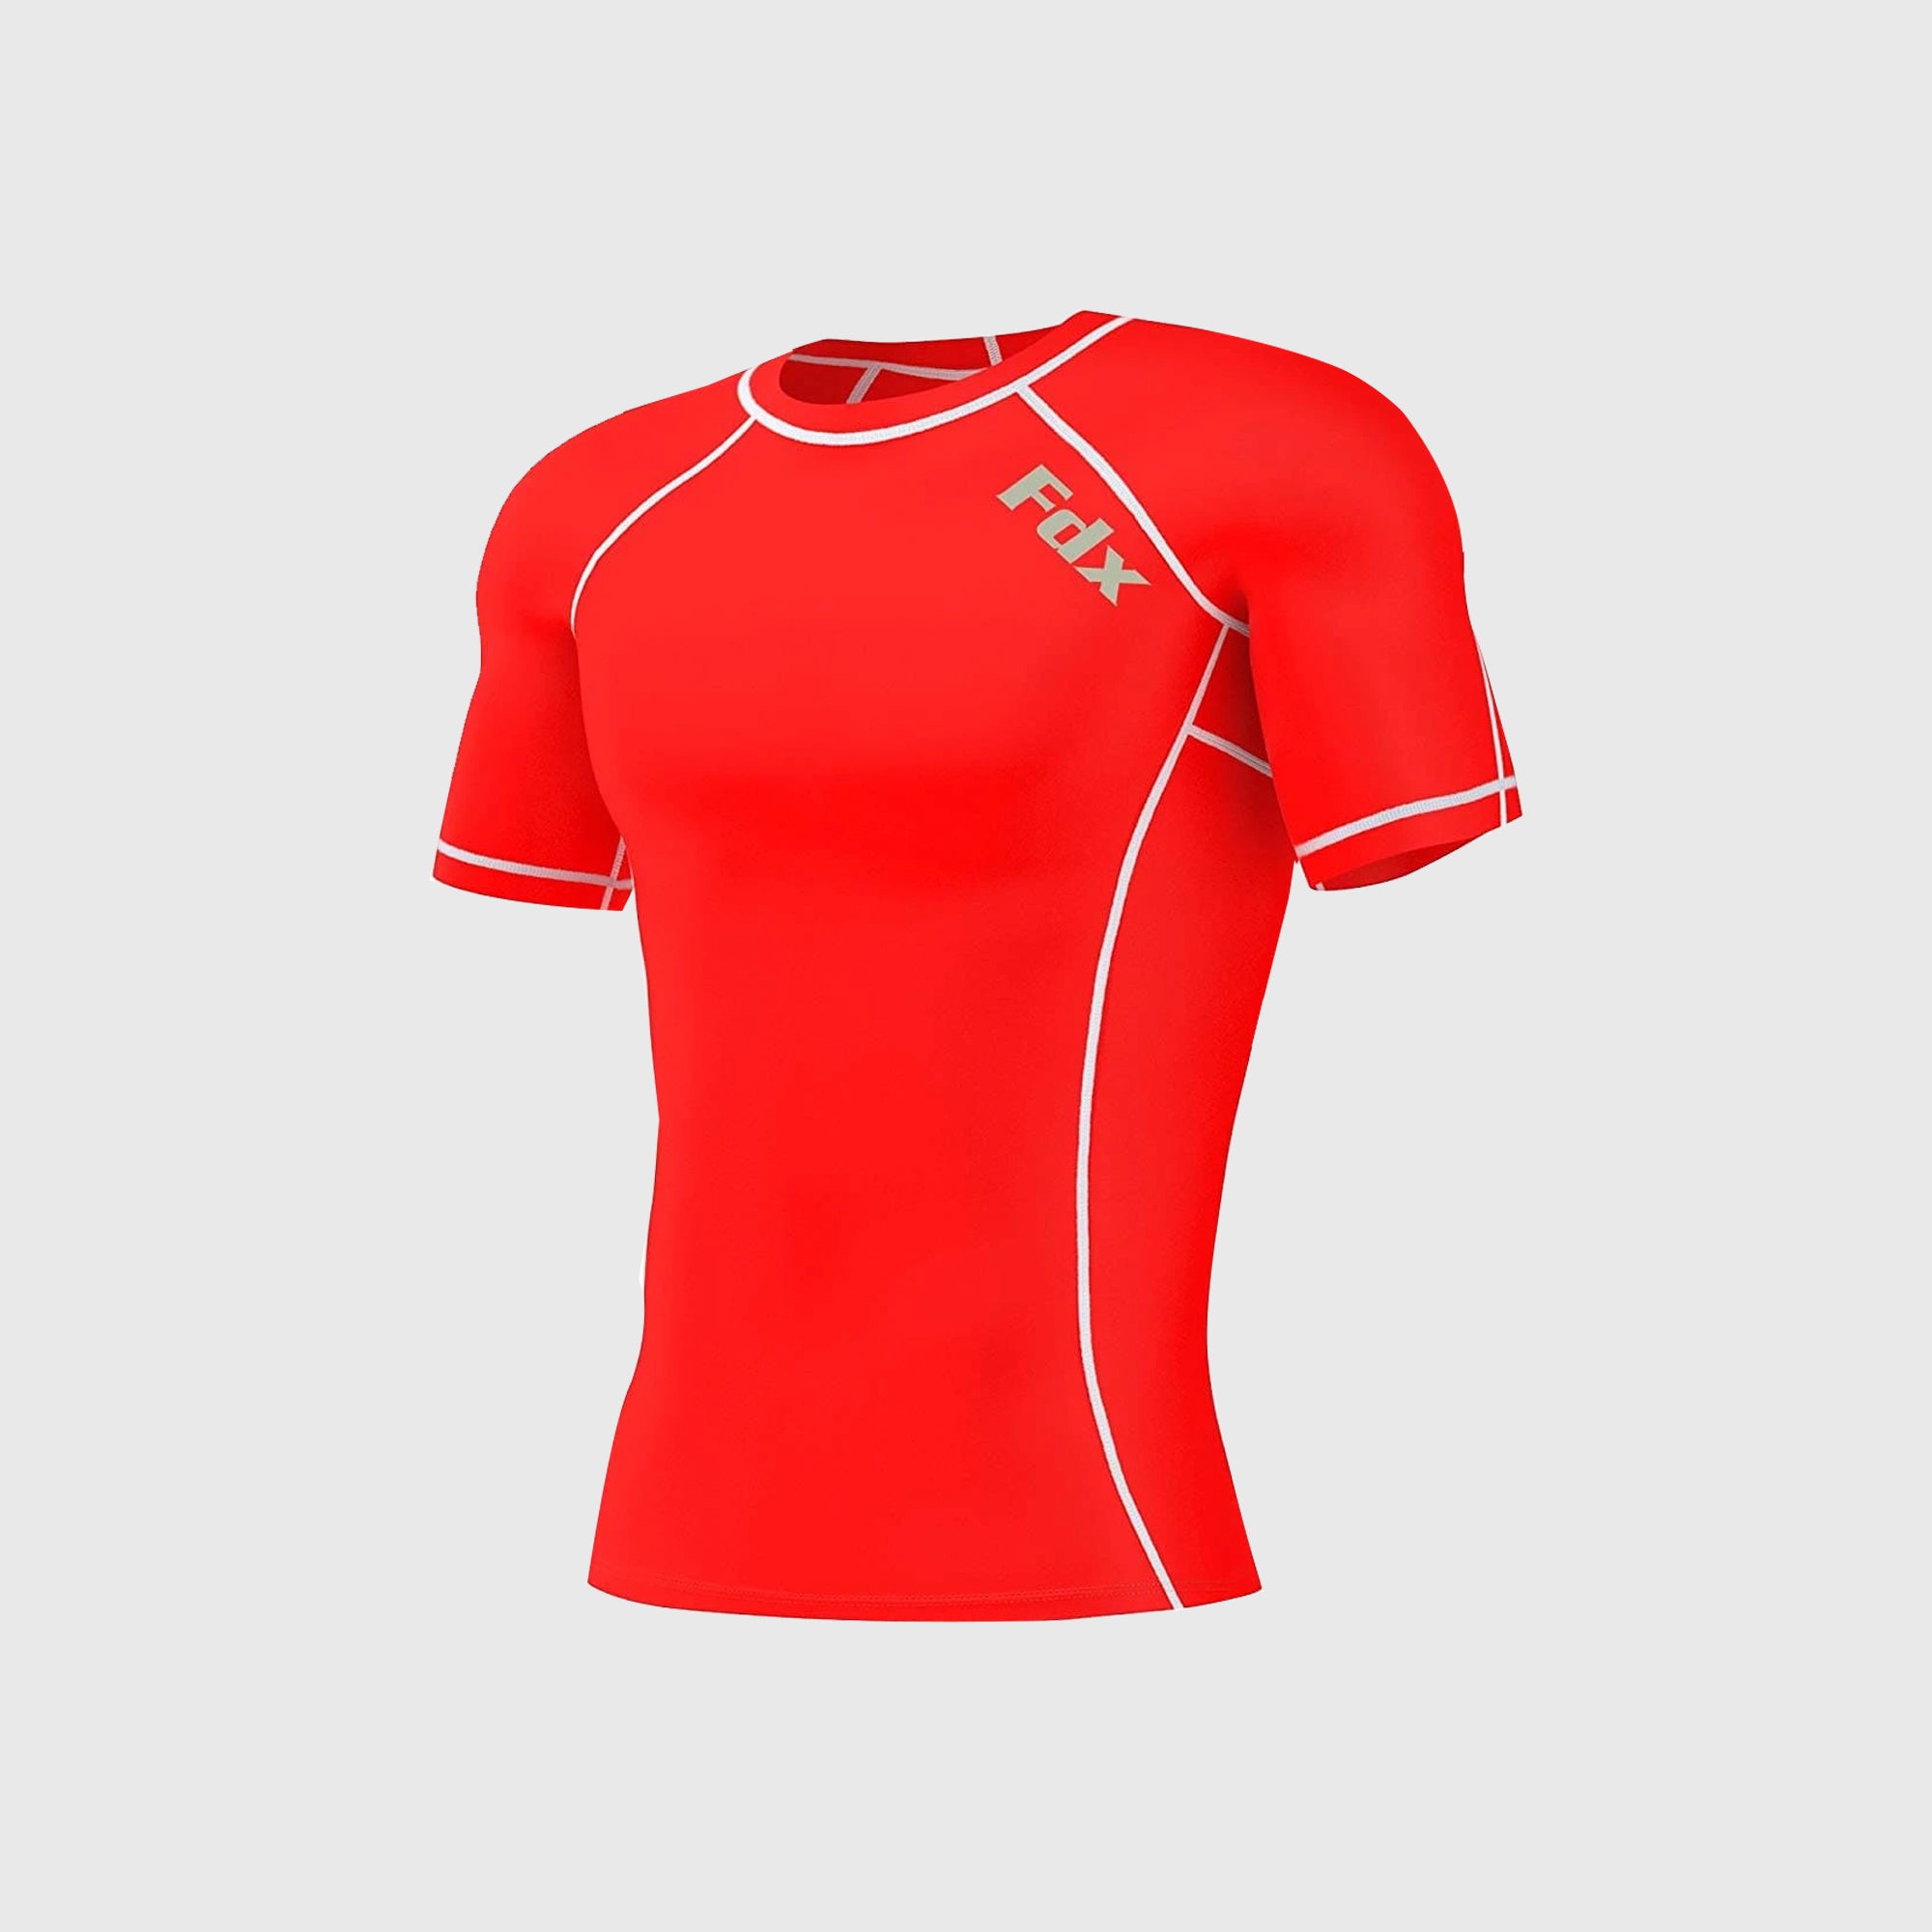 Fdx Mens Red Short Sleeve Compression Top Running Gym Workout Wear Rash Guard Stretchable Breathable - Aeroform